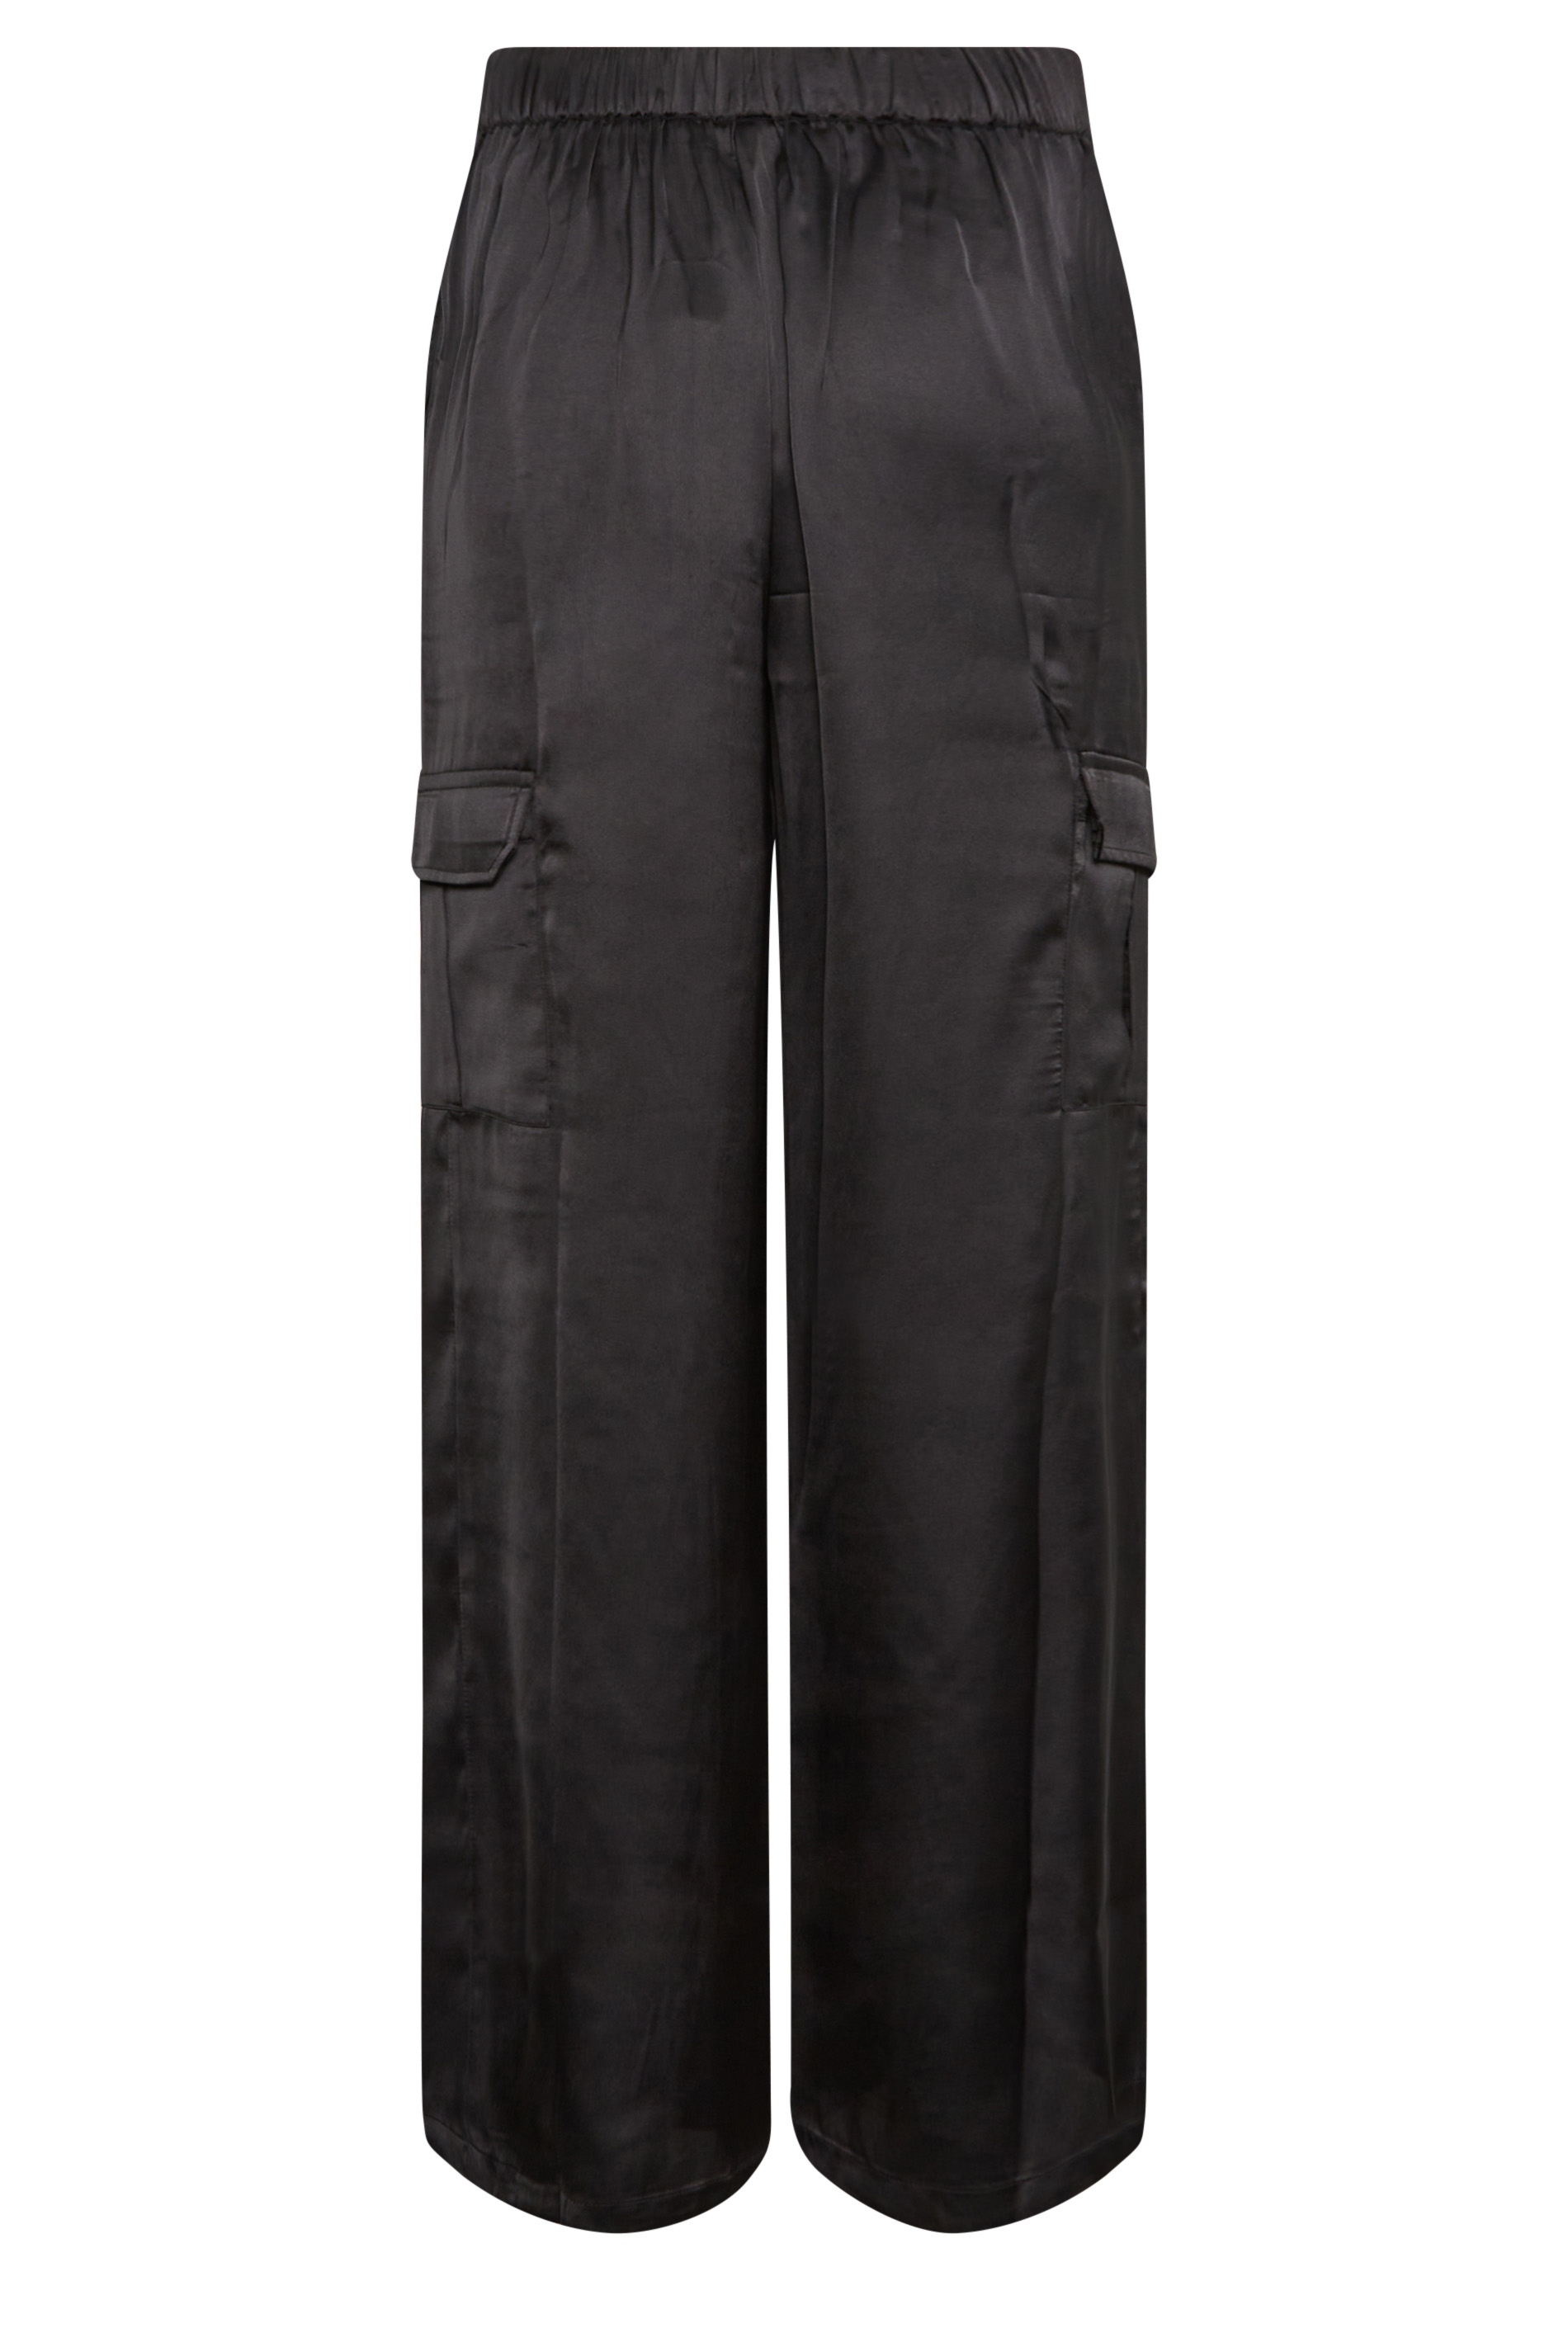 Daya Tall Satin Straight Leg Cargo Trousers in Black | Oh Polly